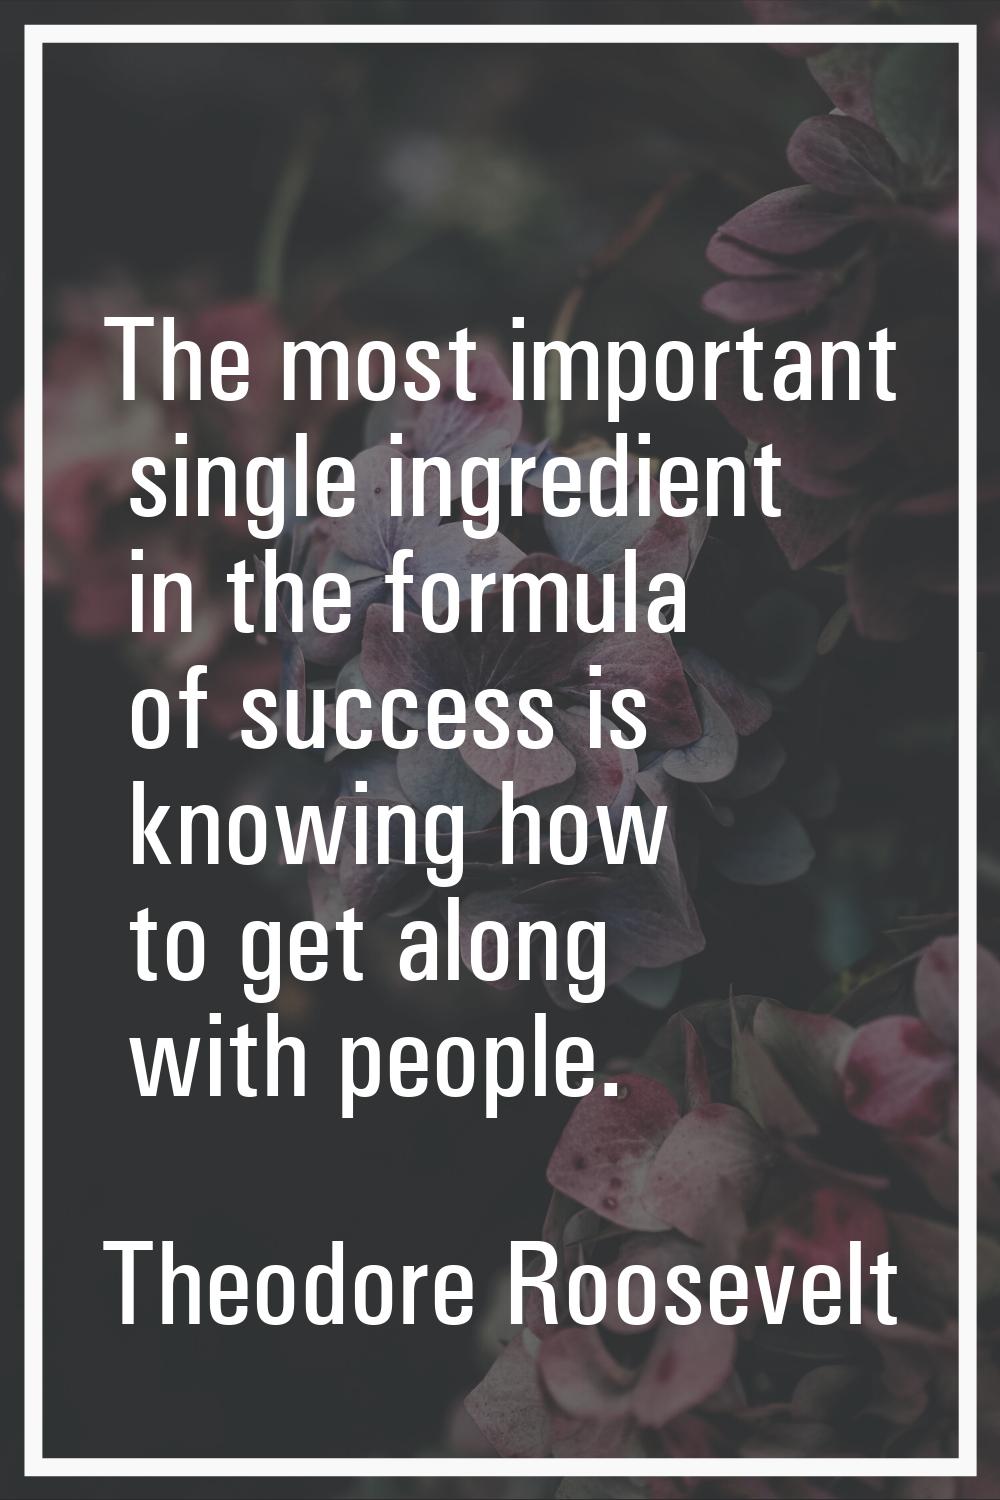 The most important single ingredient in the formula of success is knowing how to get along with peo